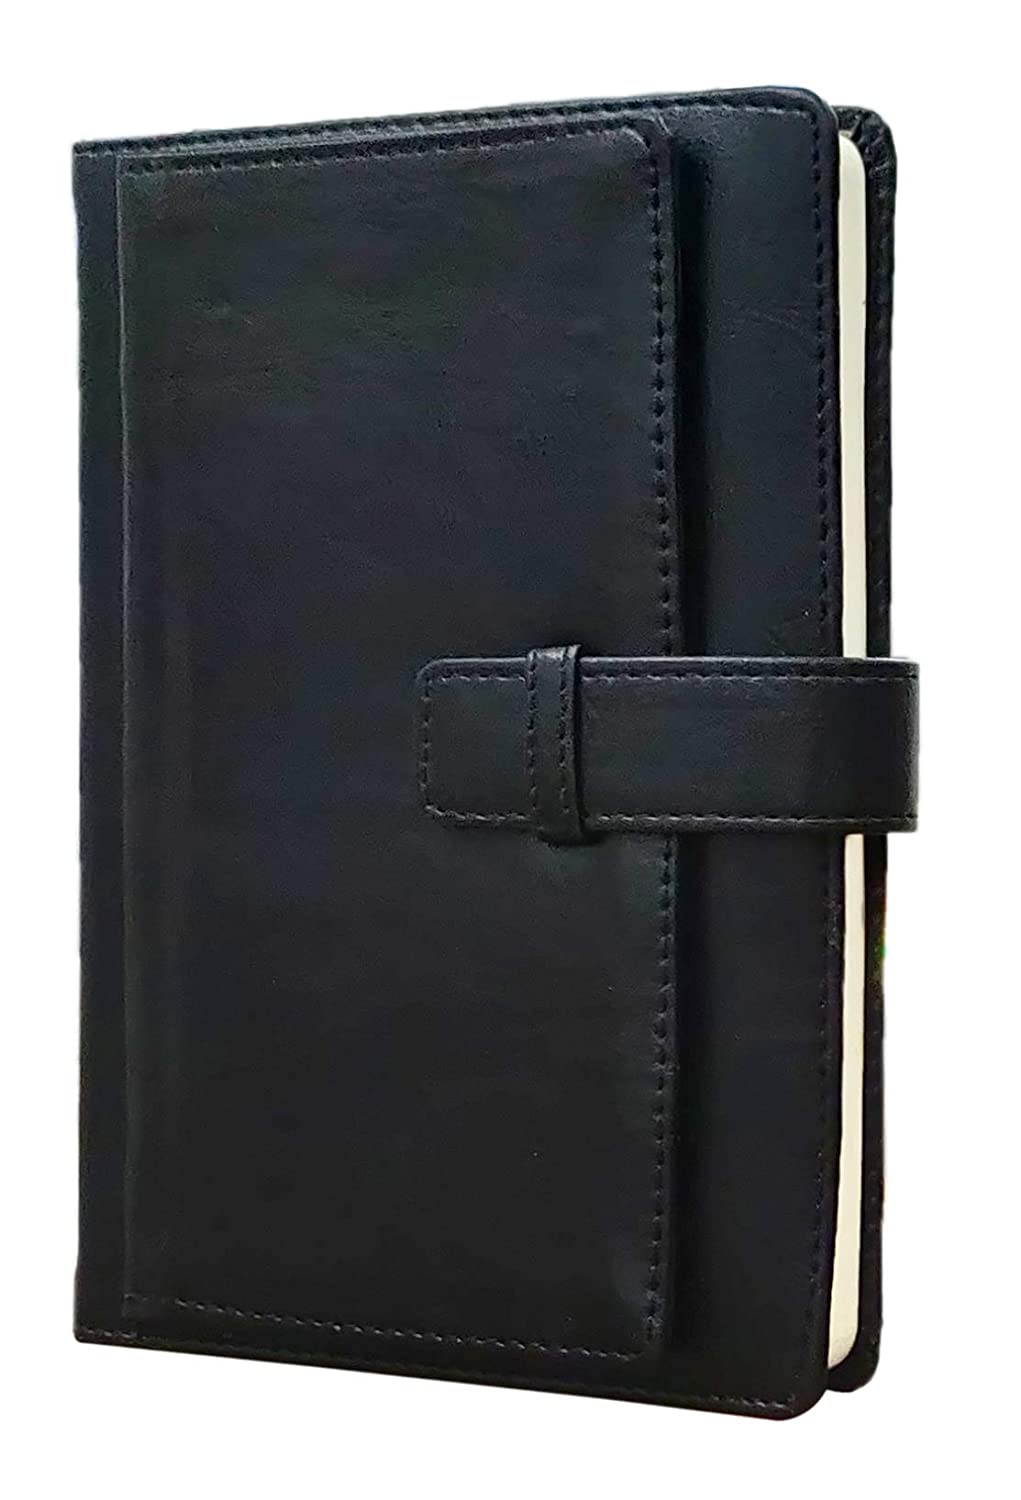 AccuPrints Black Hard Bound A5 or 5.8 * 8.3 inches Diary with Belt Lock